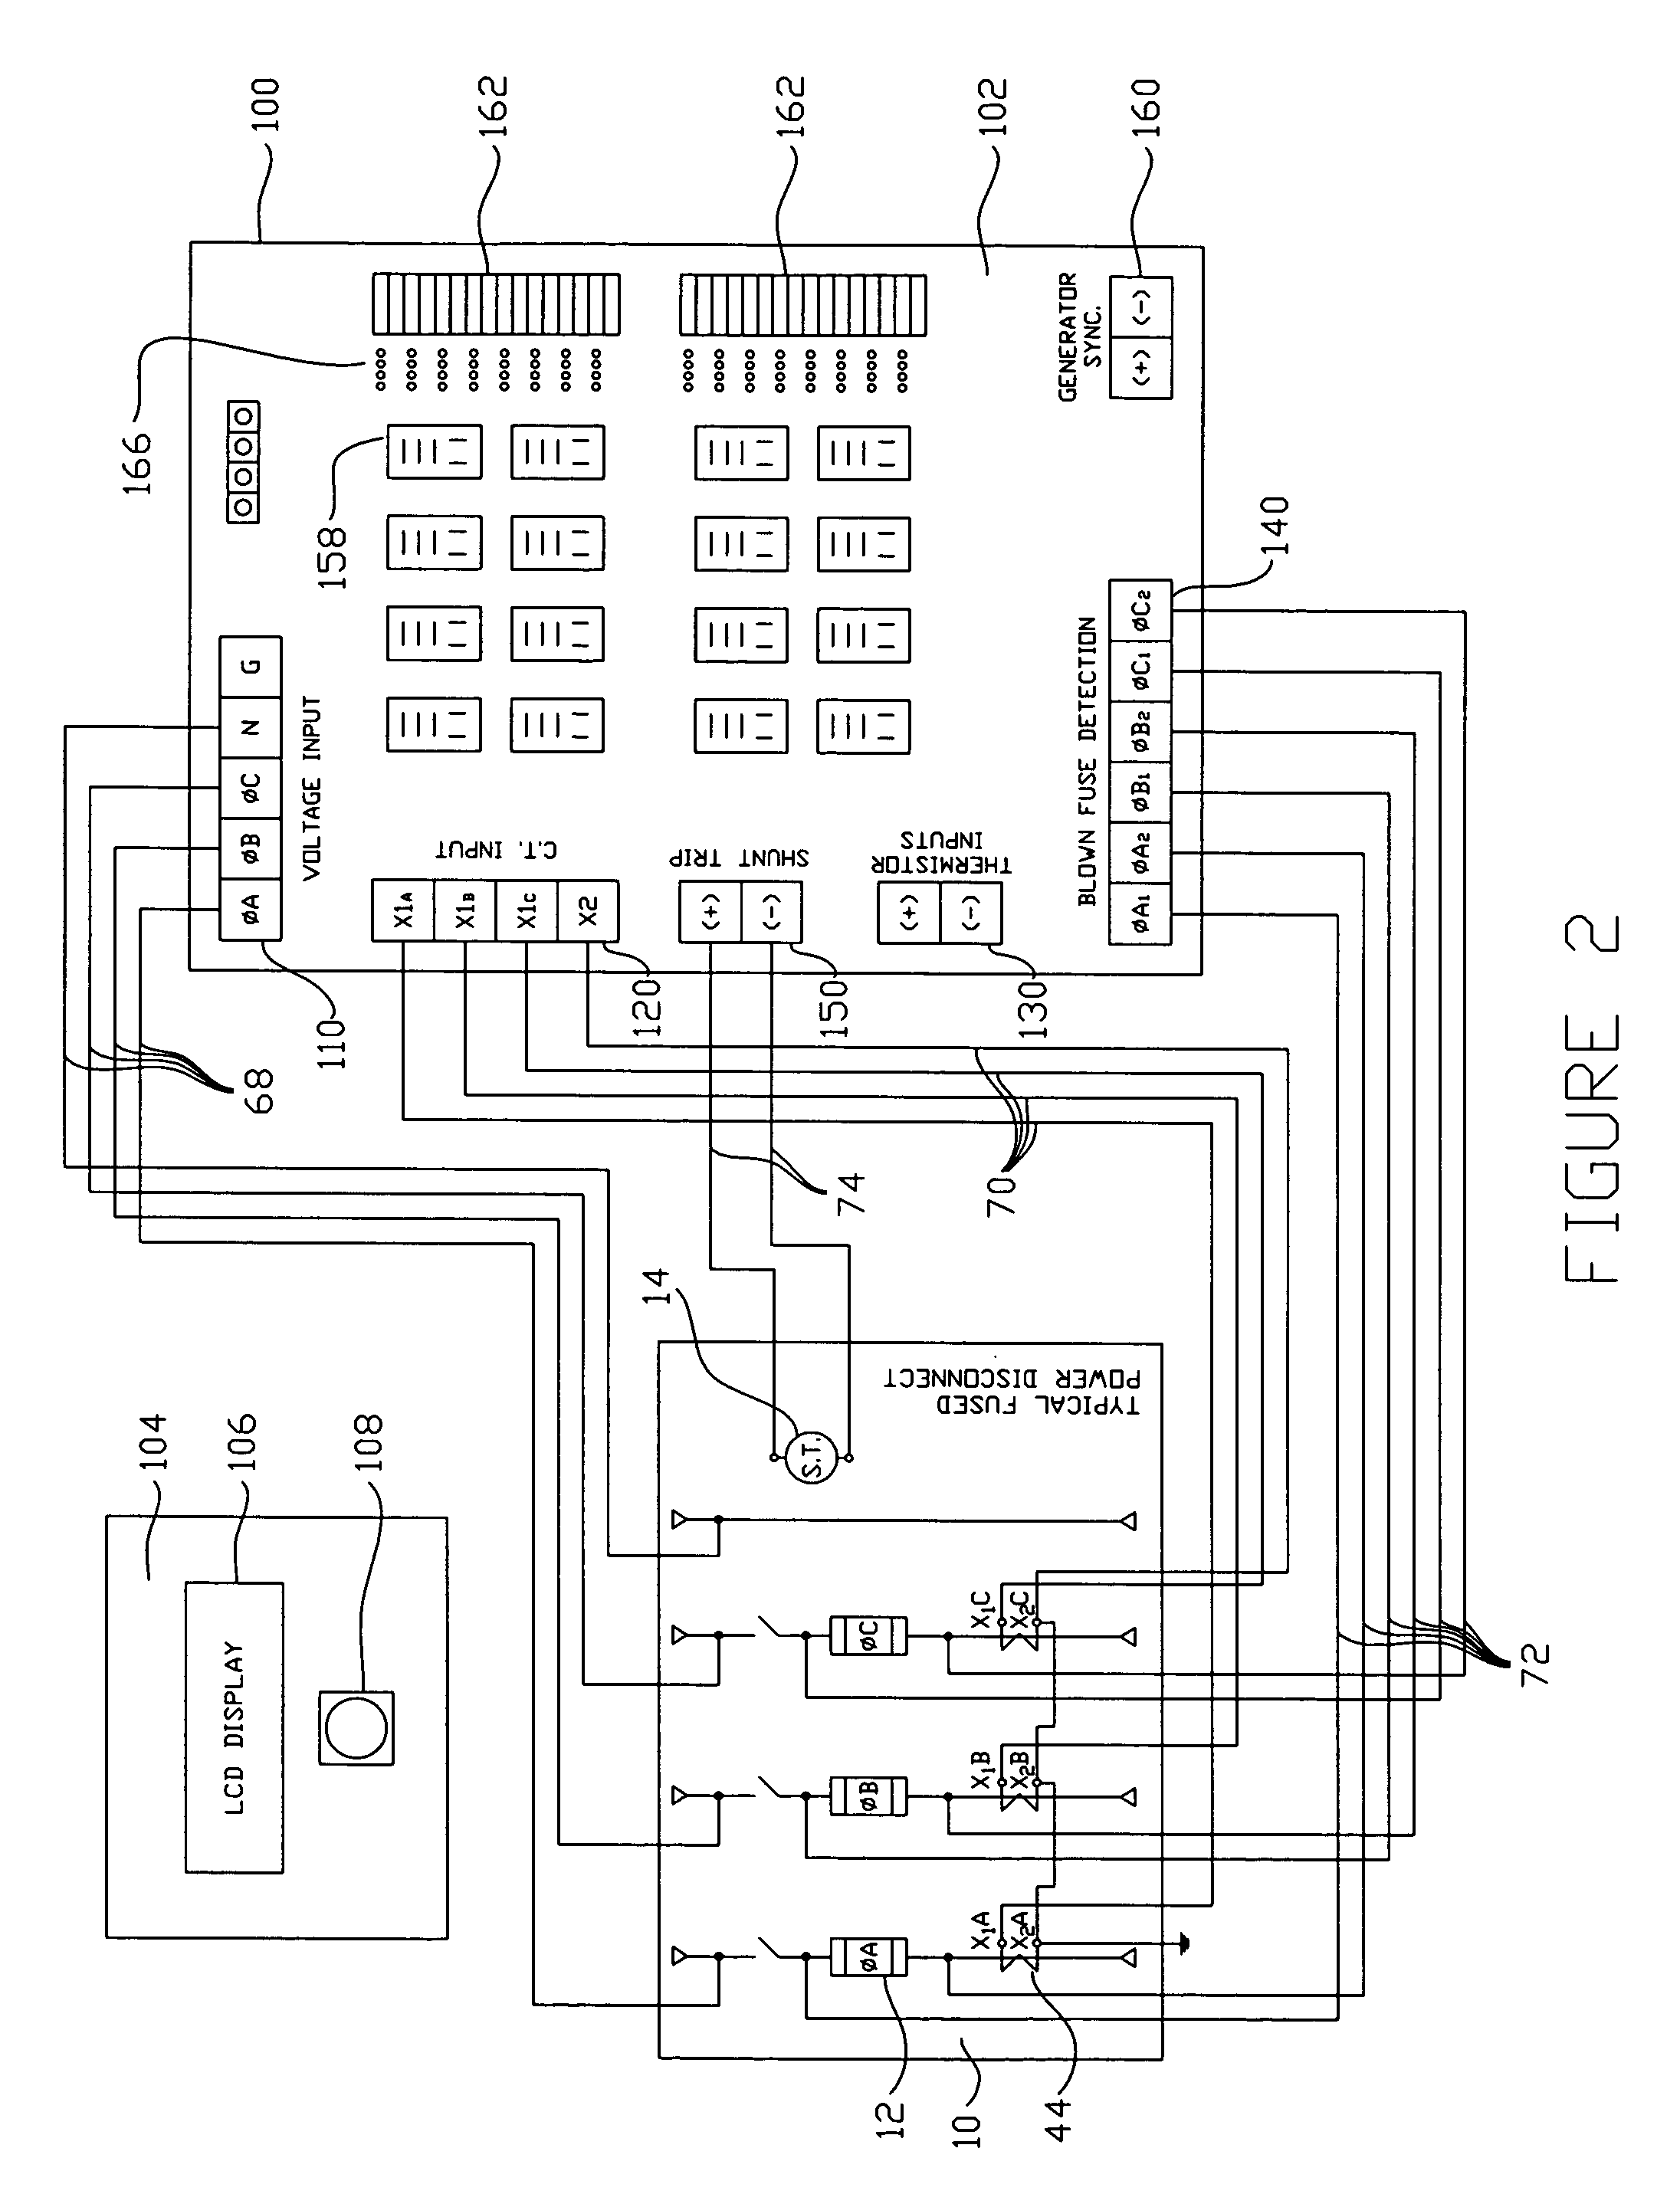 Multi-function power monitor and circuit protector